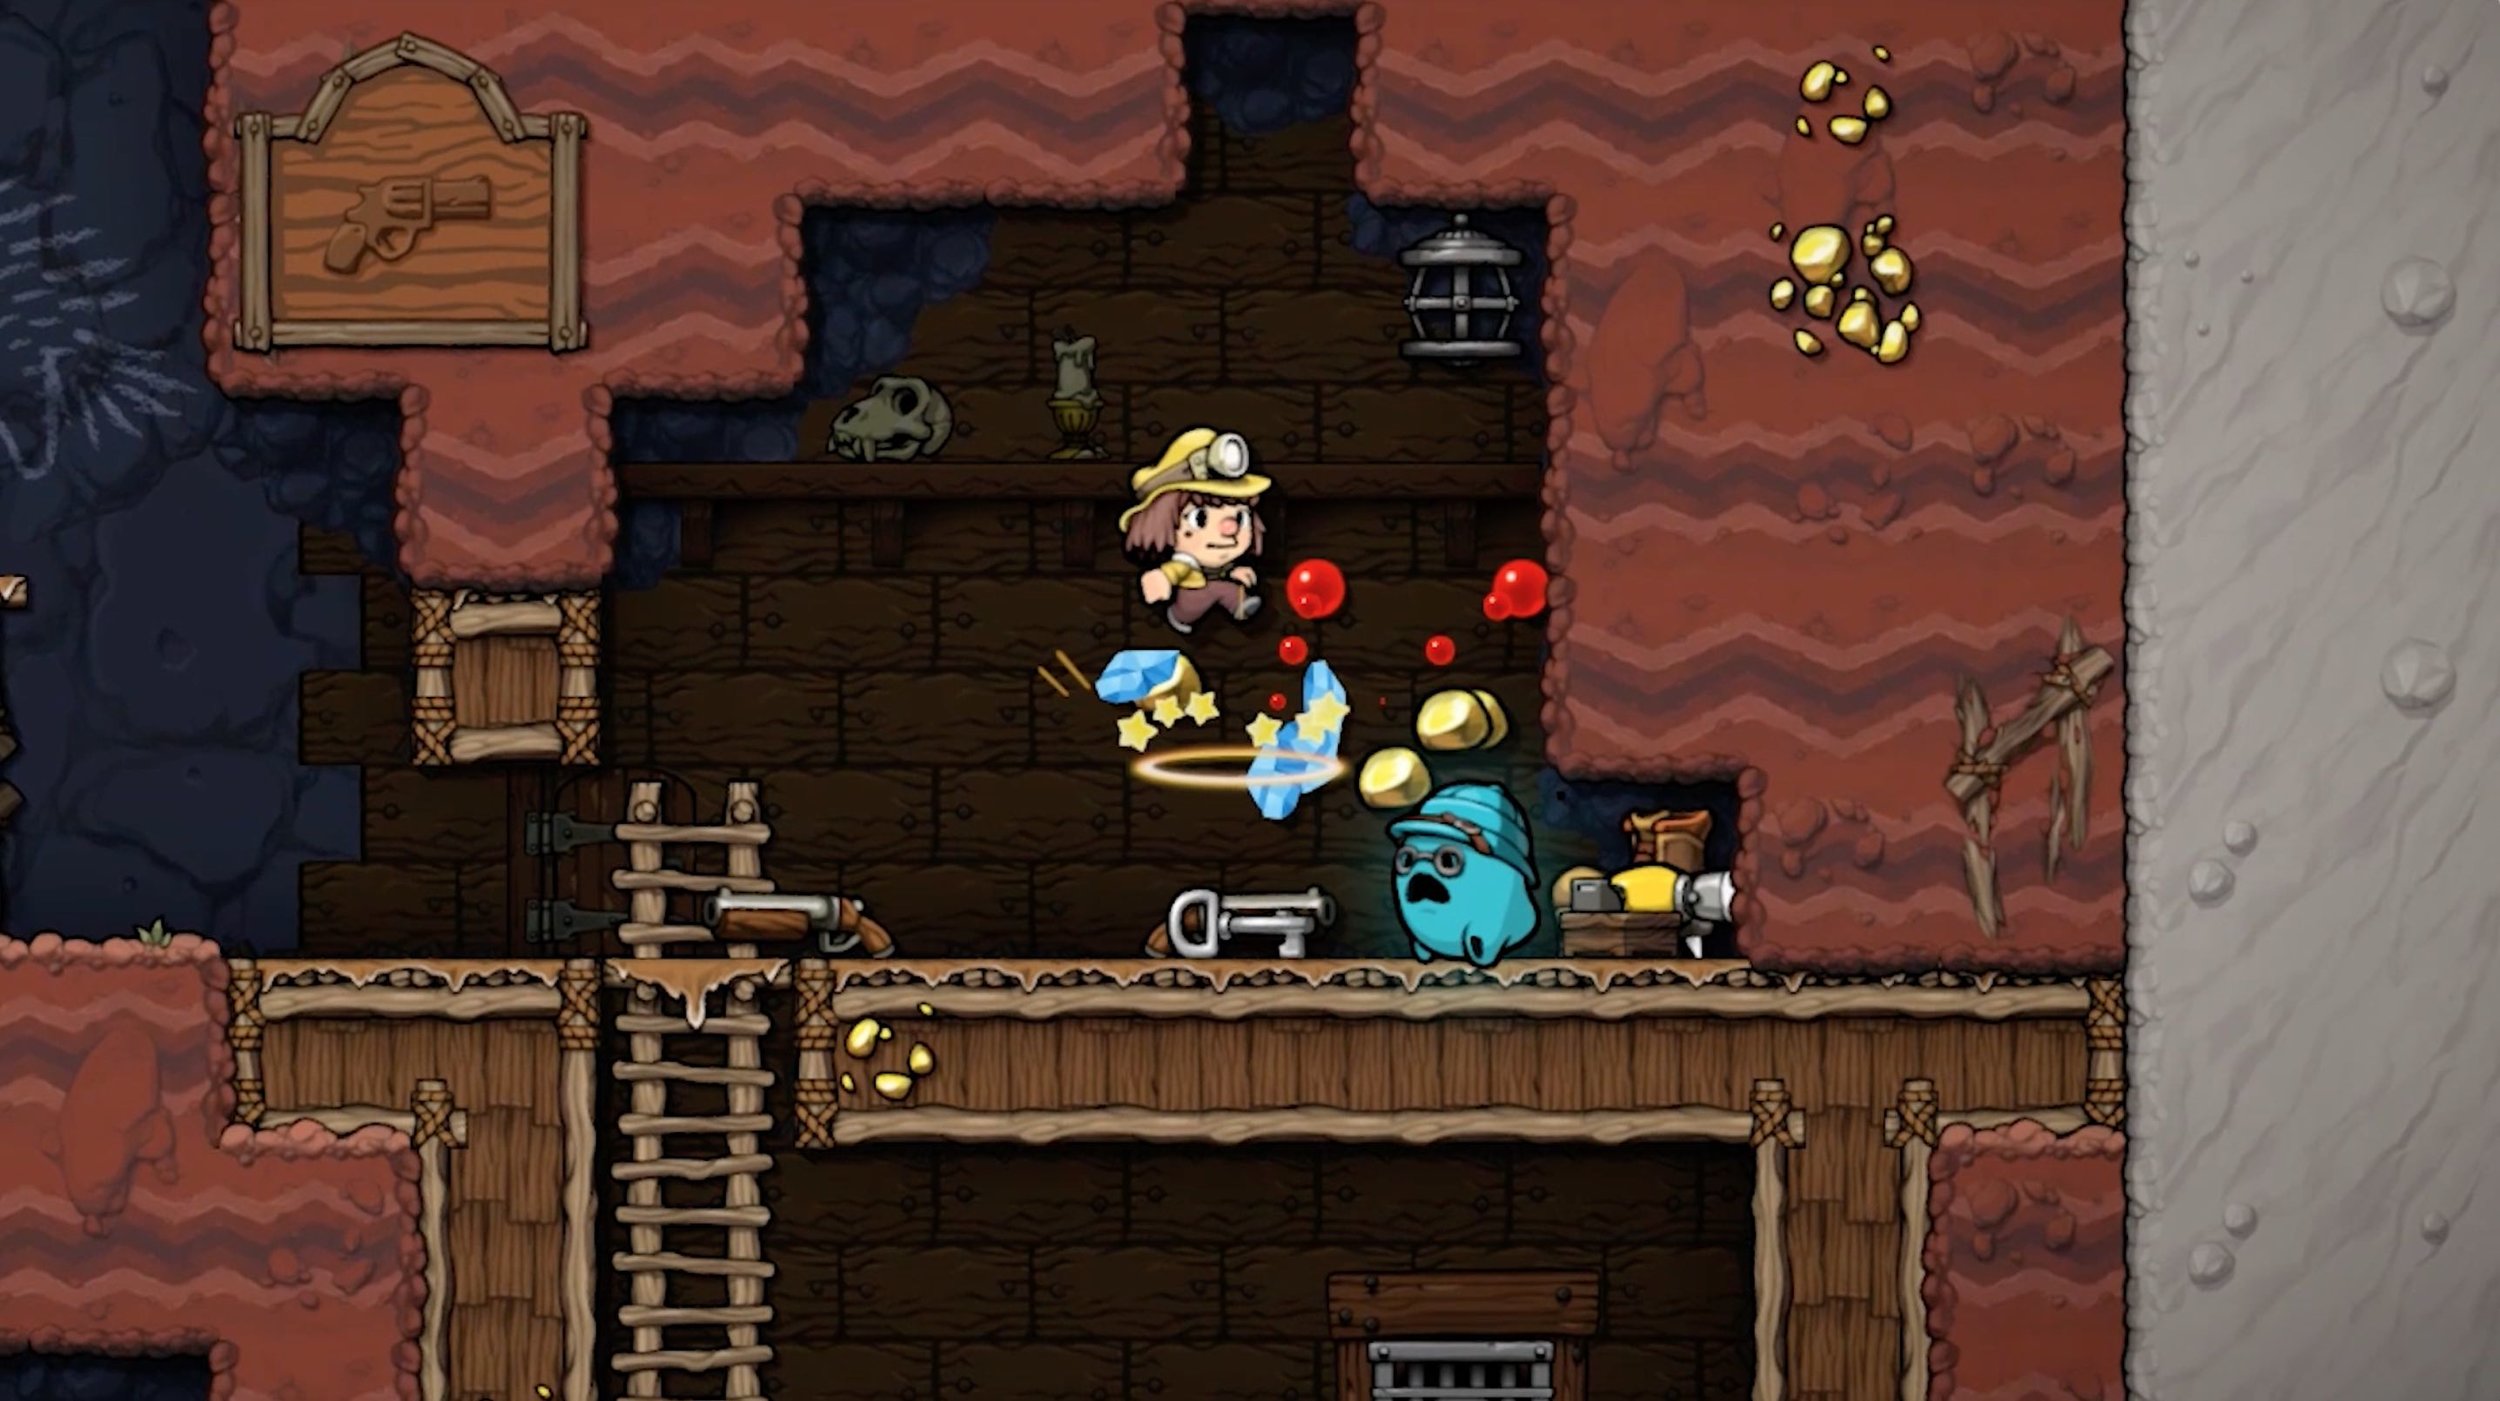 Spelunky 2: Hands-on preview from GDC 2019